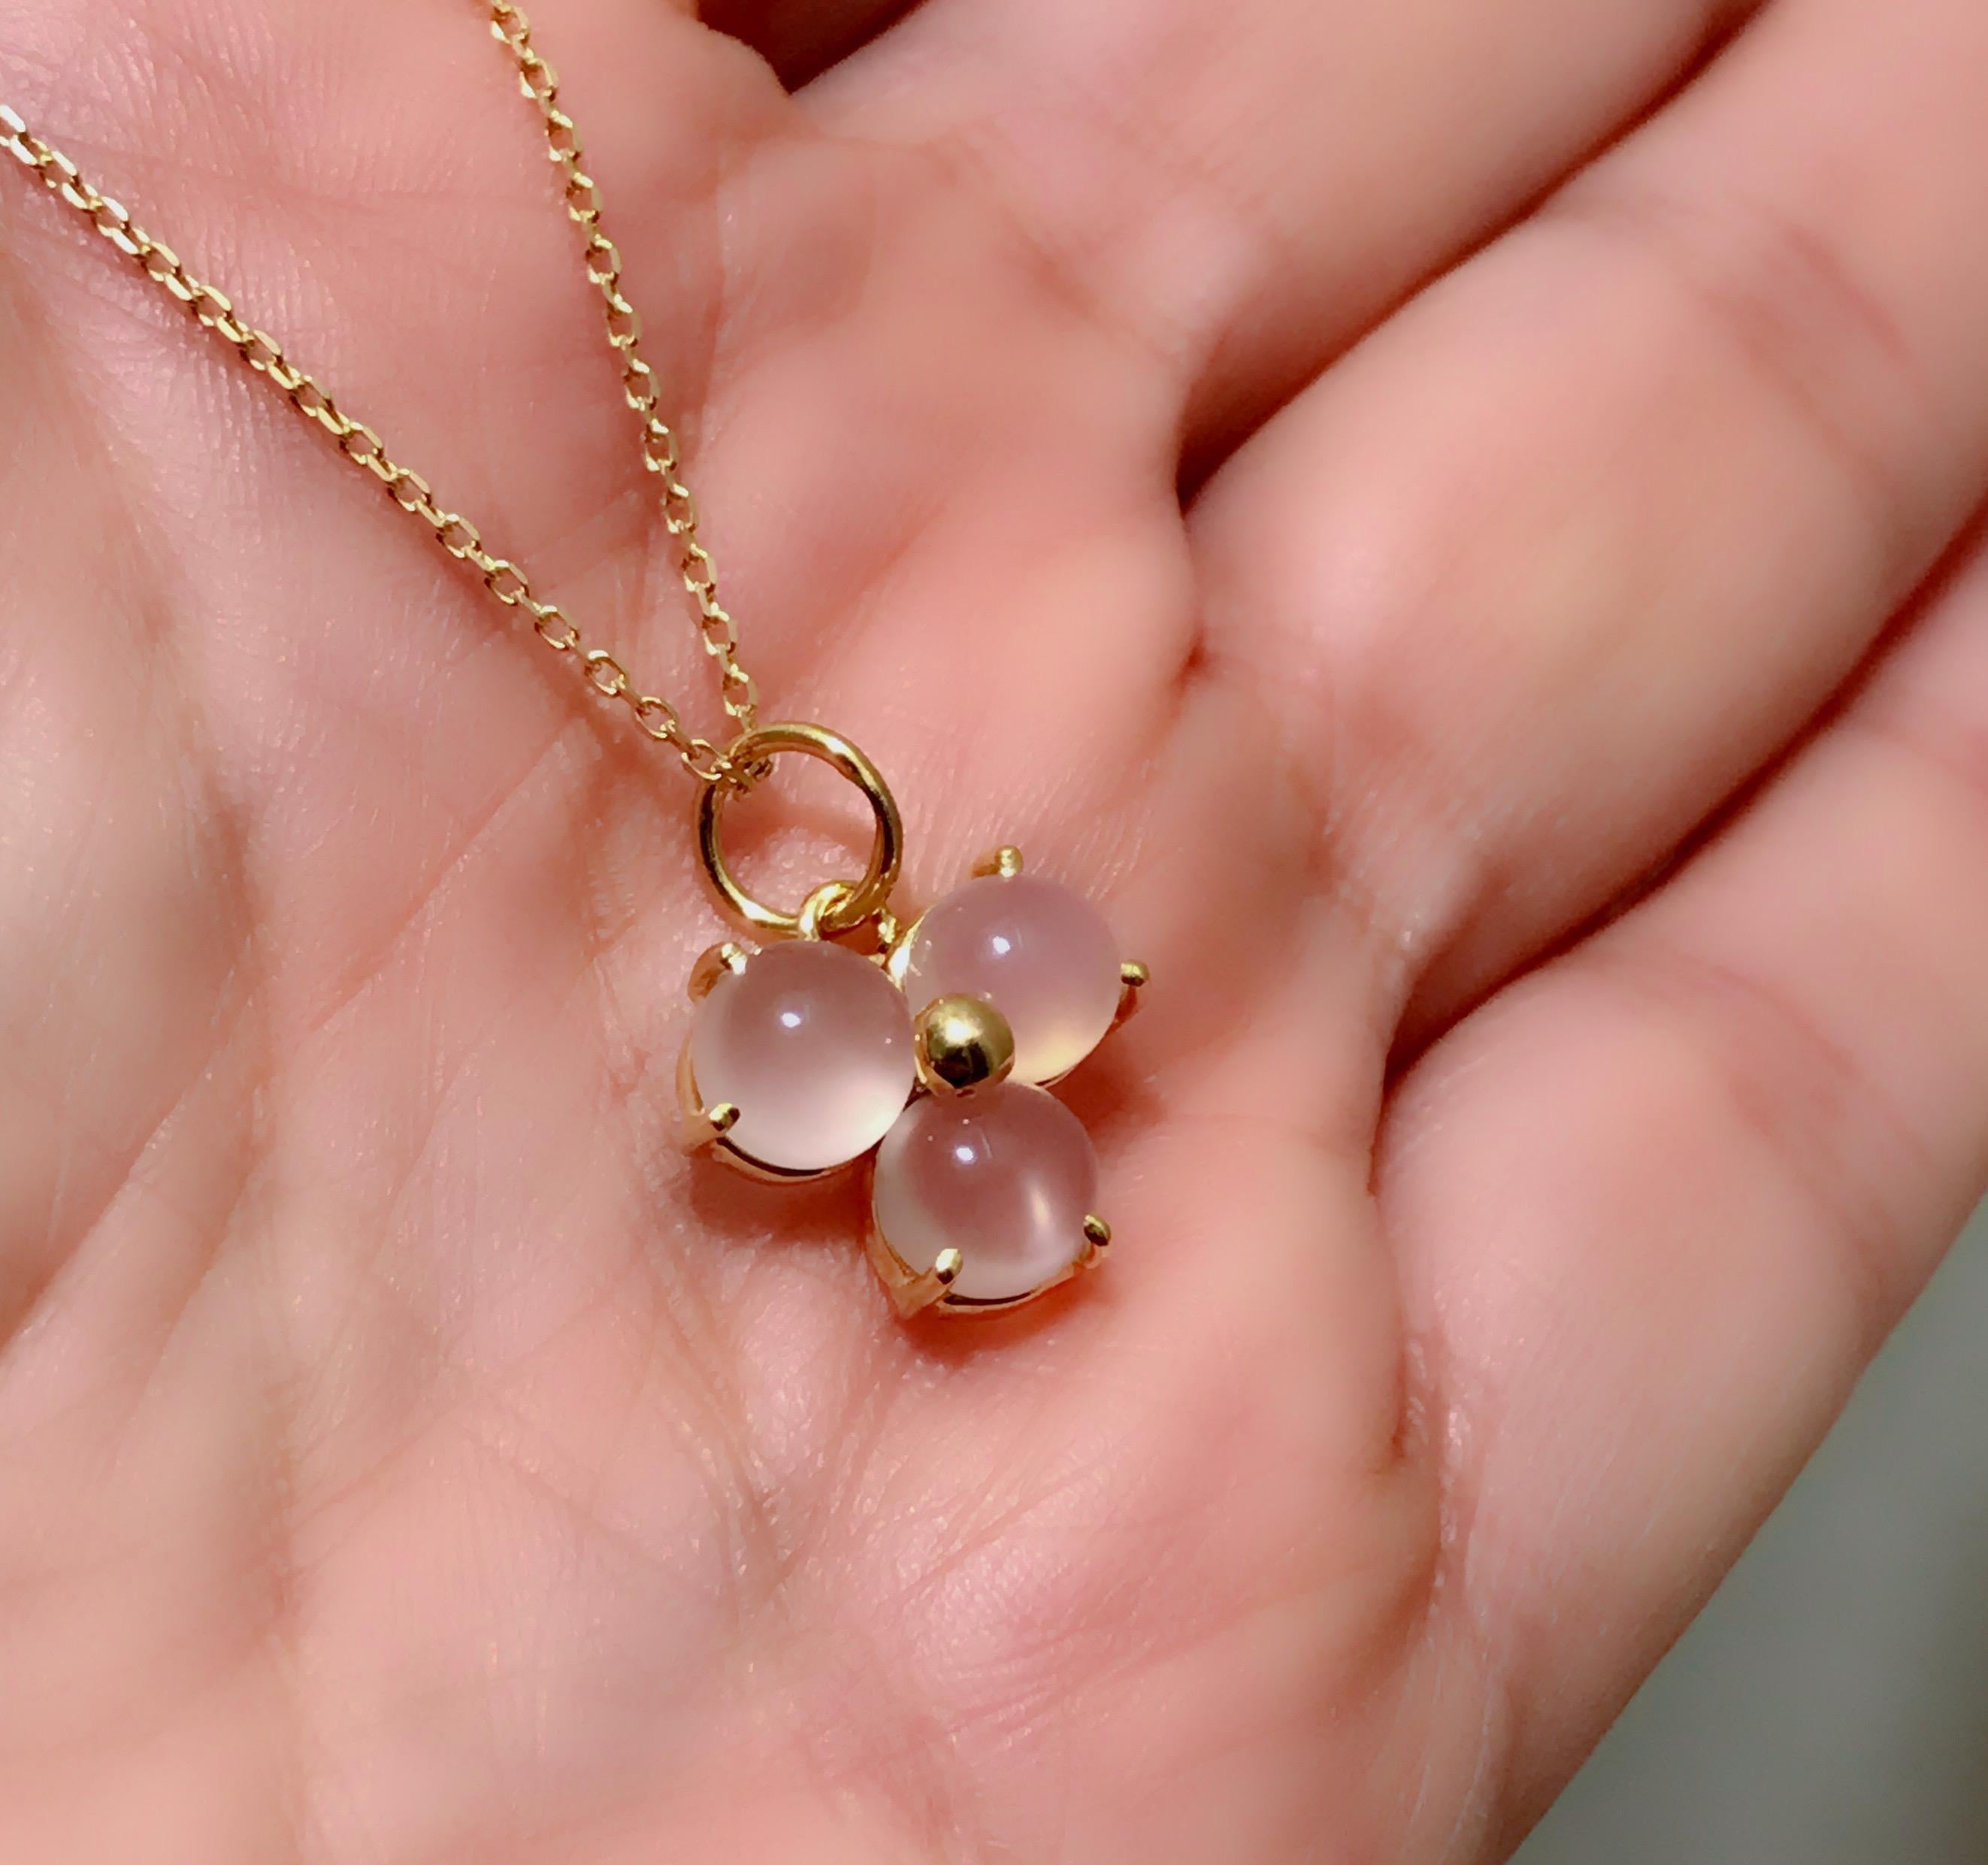 18 Karat Solid Yellow Gold Pink Blossom Flower Charm Pendant Chain Necklace In New Condition For Sale In London, GB